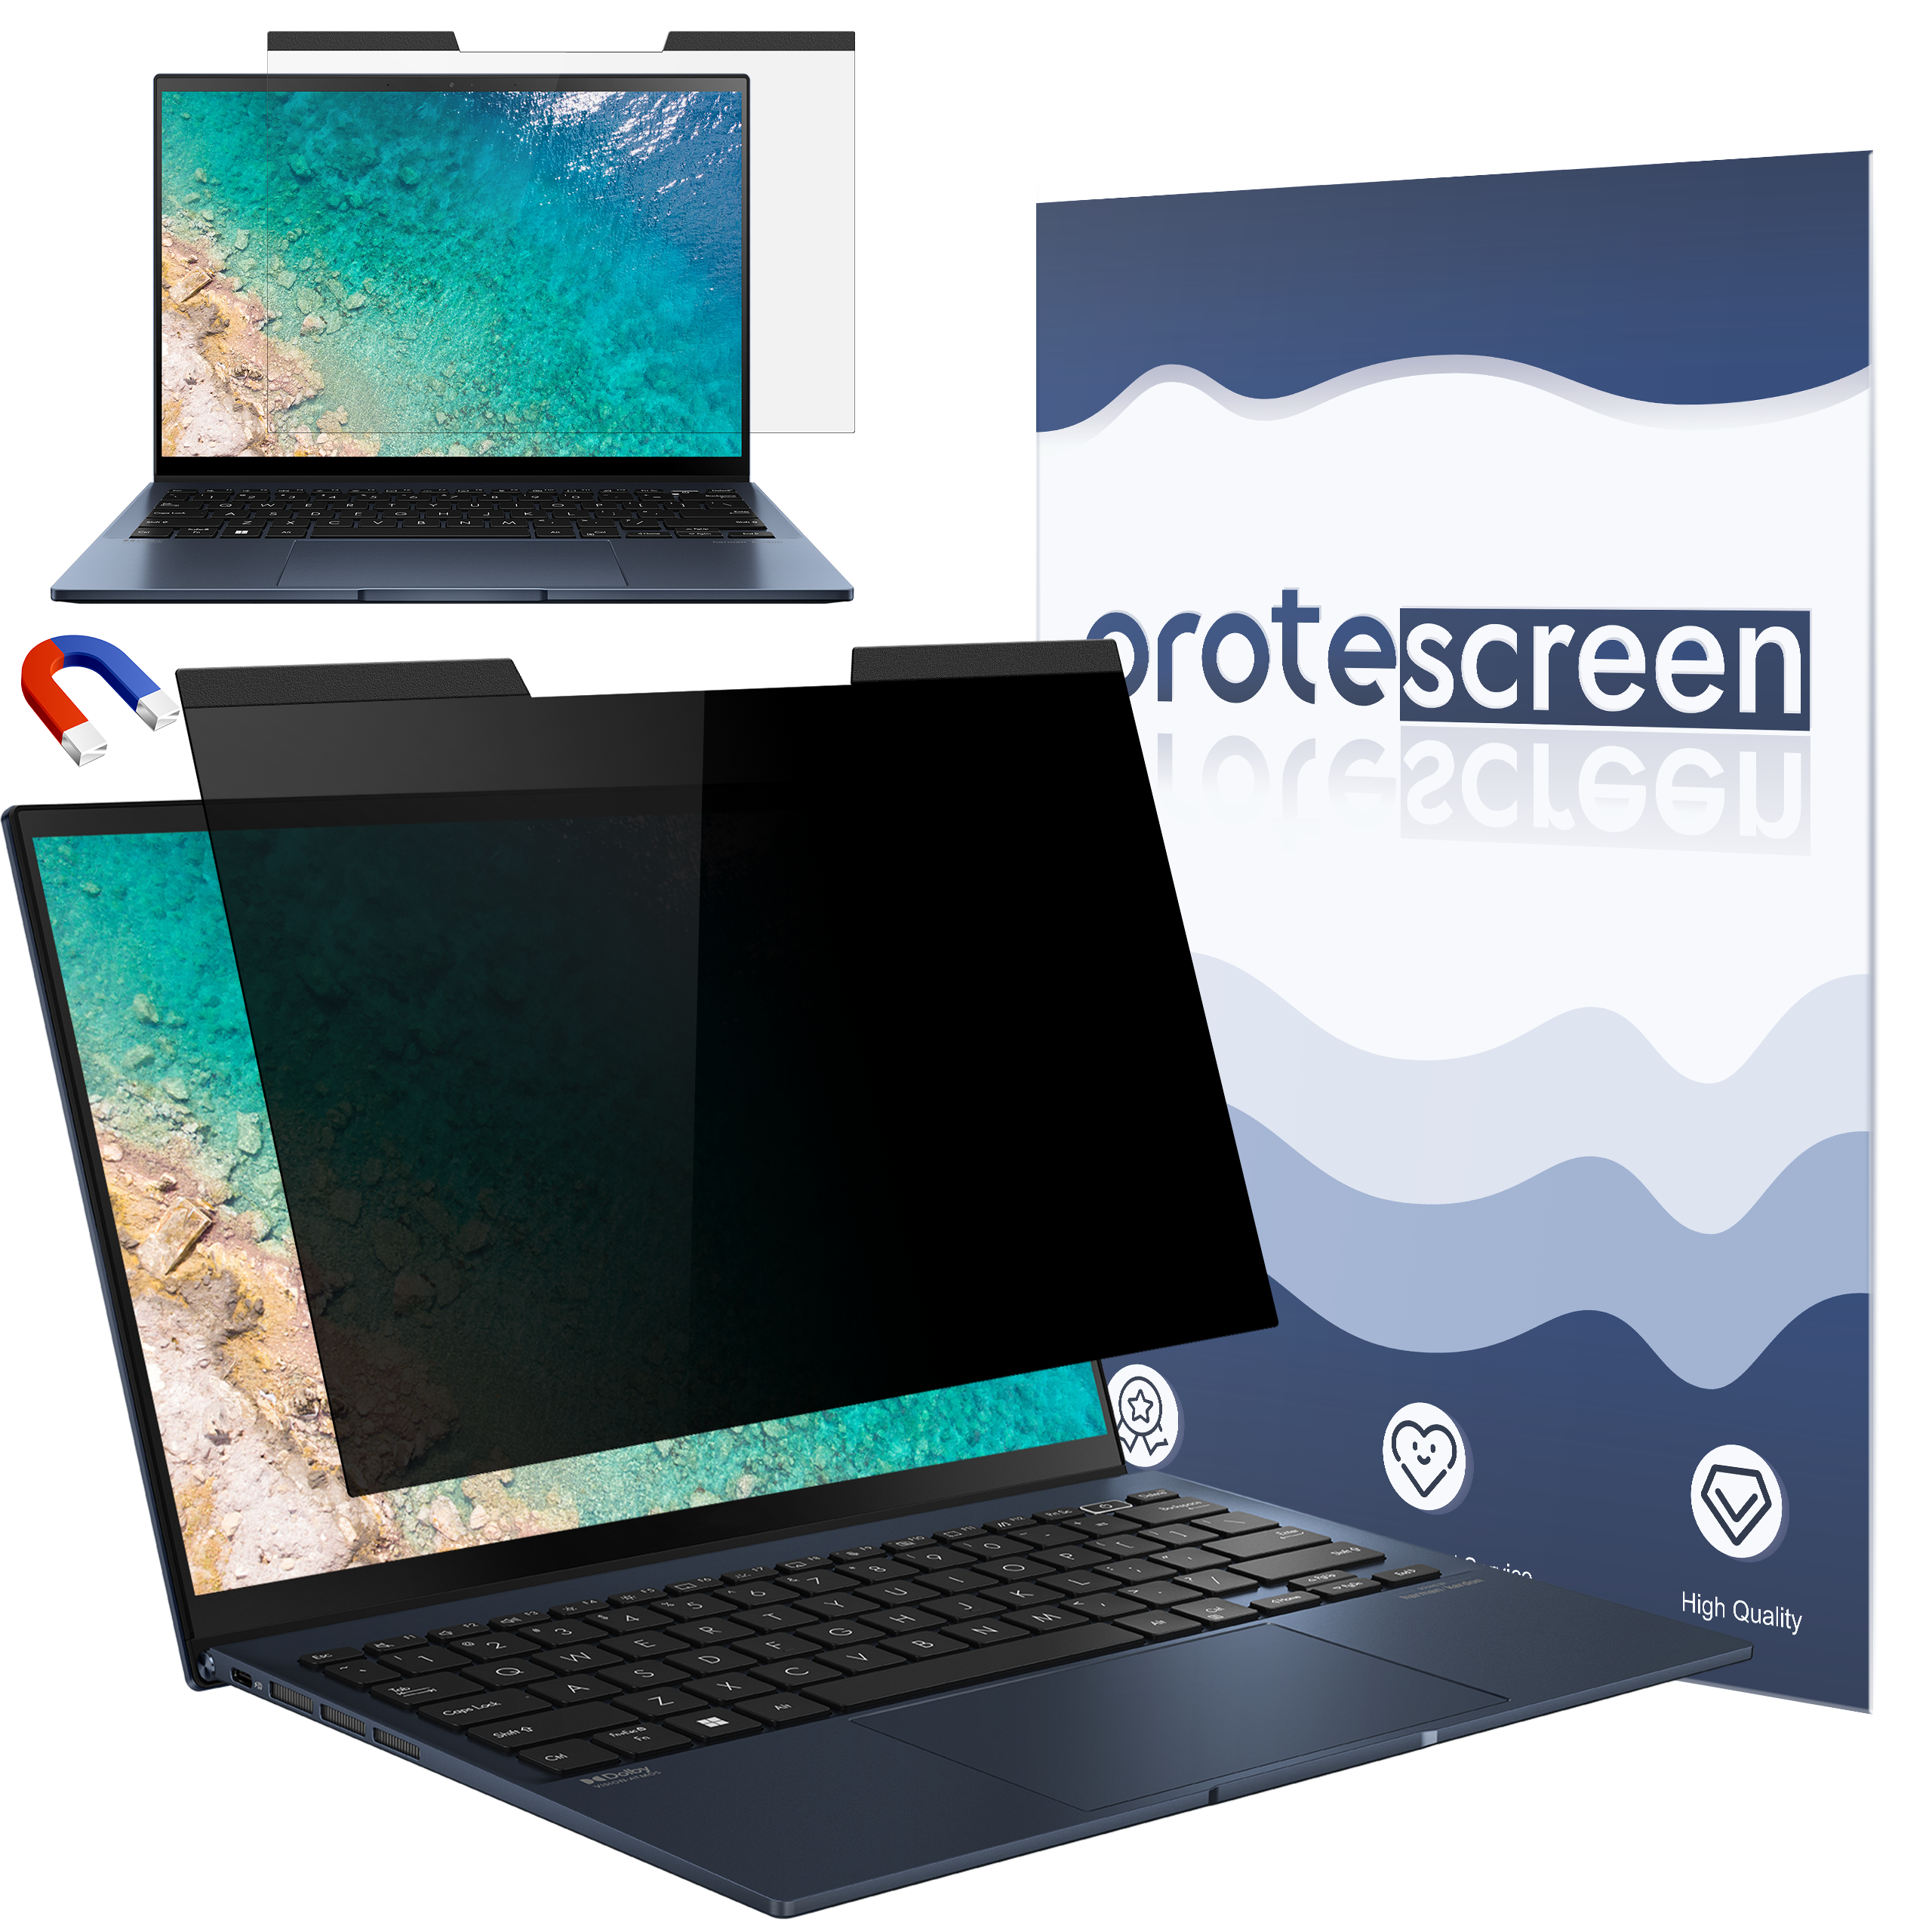 Magnetic Laptop Privacy Screen for Computer Monitor, Removable Anti Glare Protector Blue Light Filter Shield